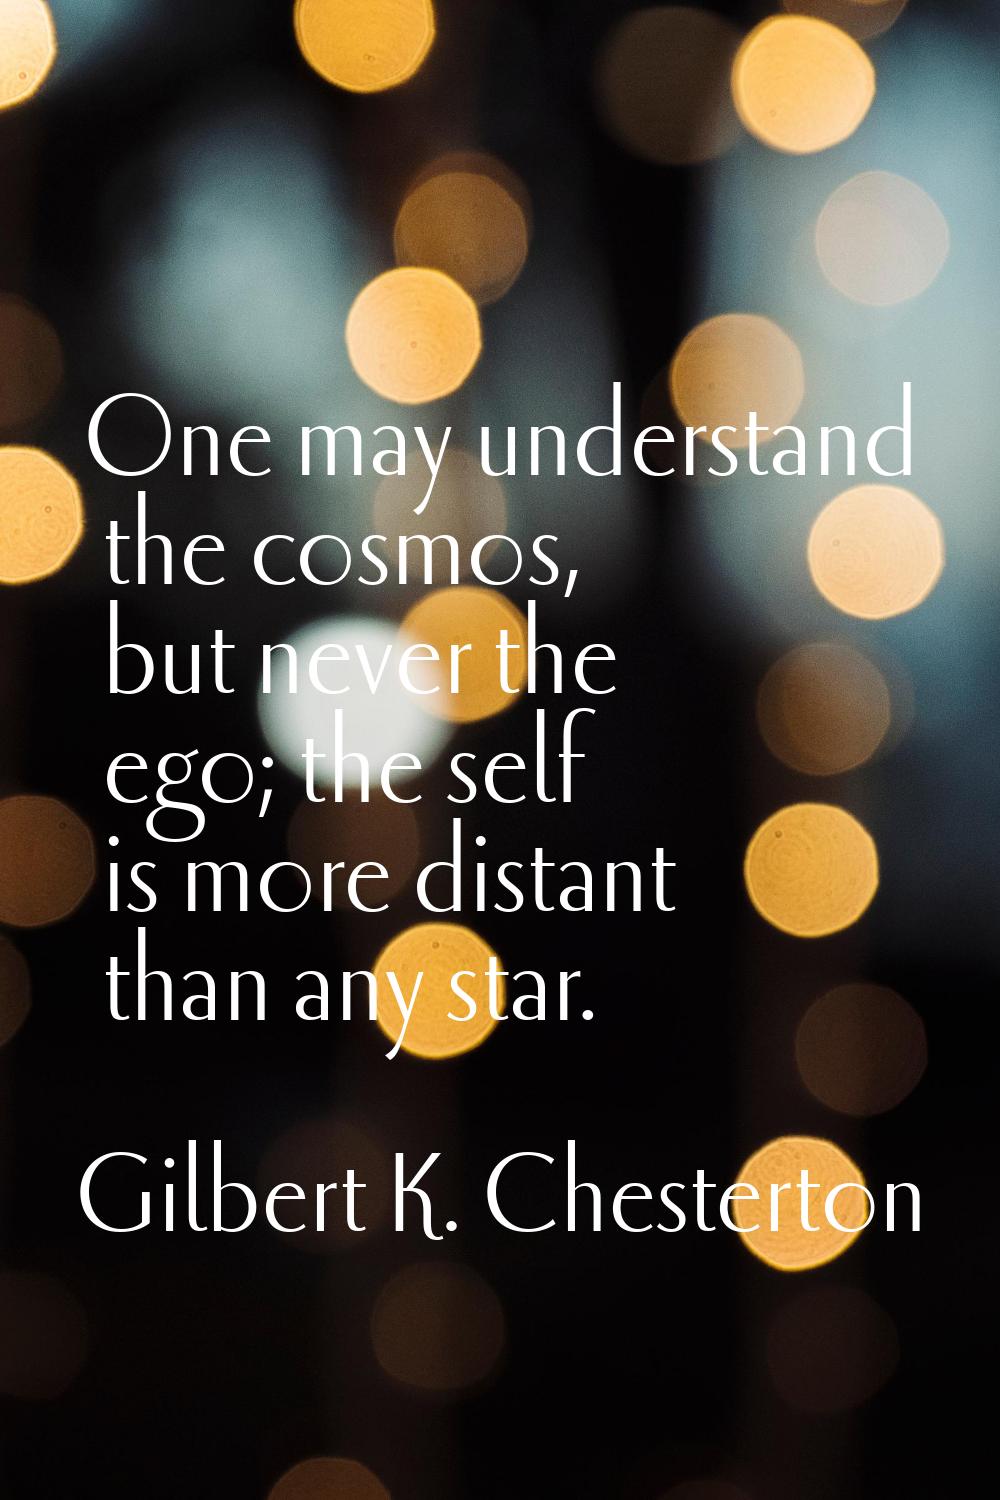 One may understand the cosmos, but never the ego; the self is more distant than any star.